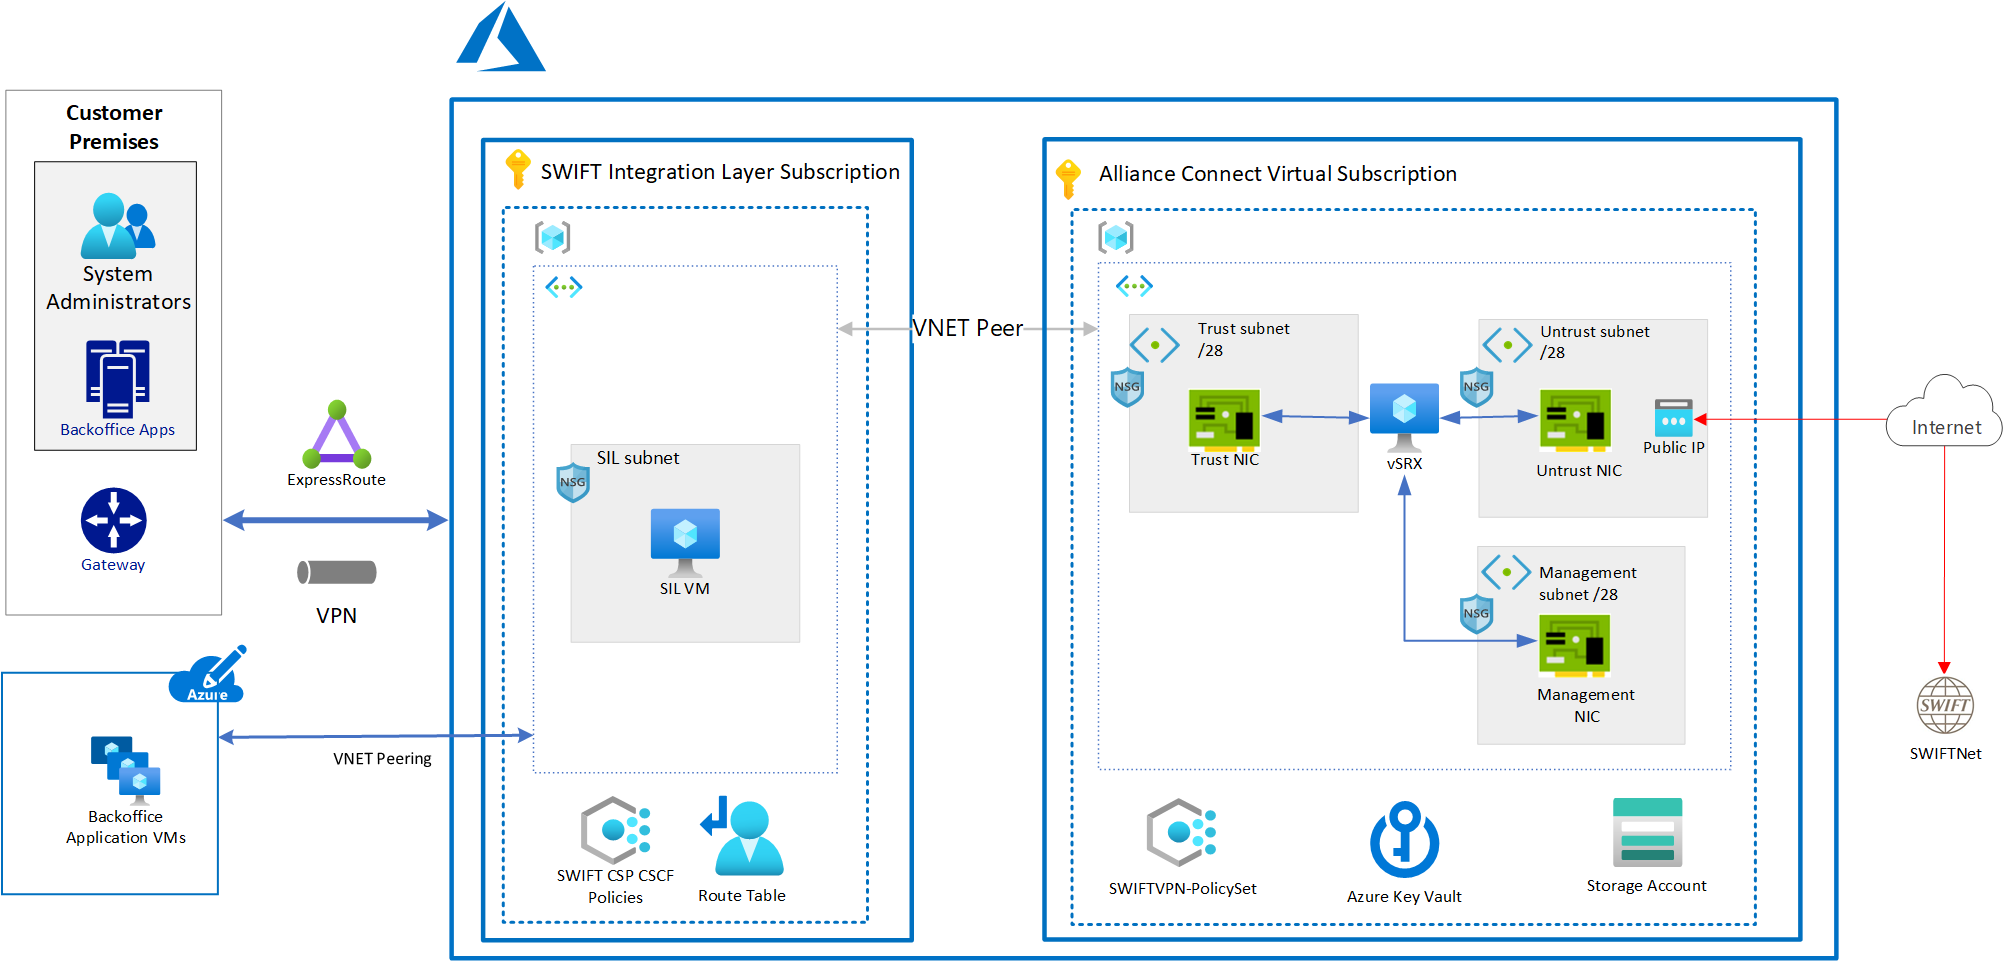 Diagram of the architecture in this example scenario for deploying Azure resources for SWIFT Alliance Cloud.